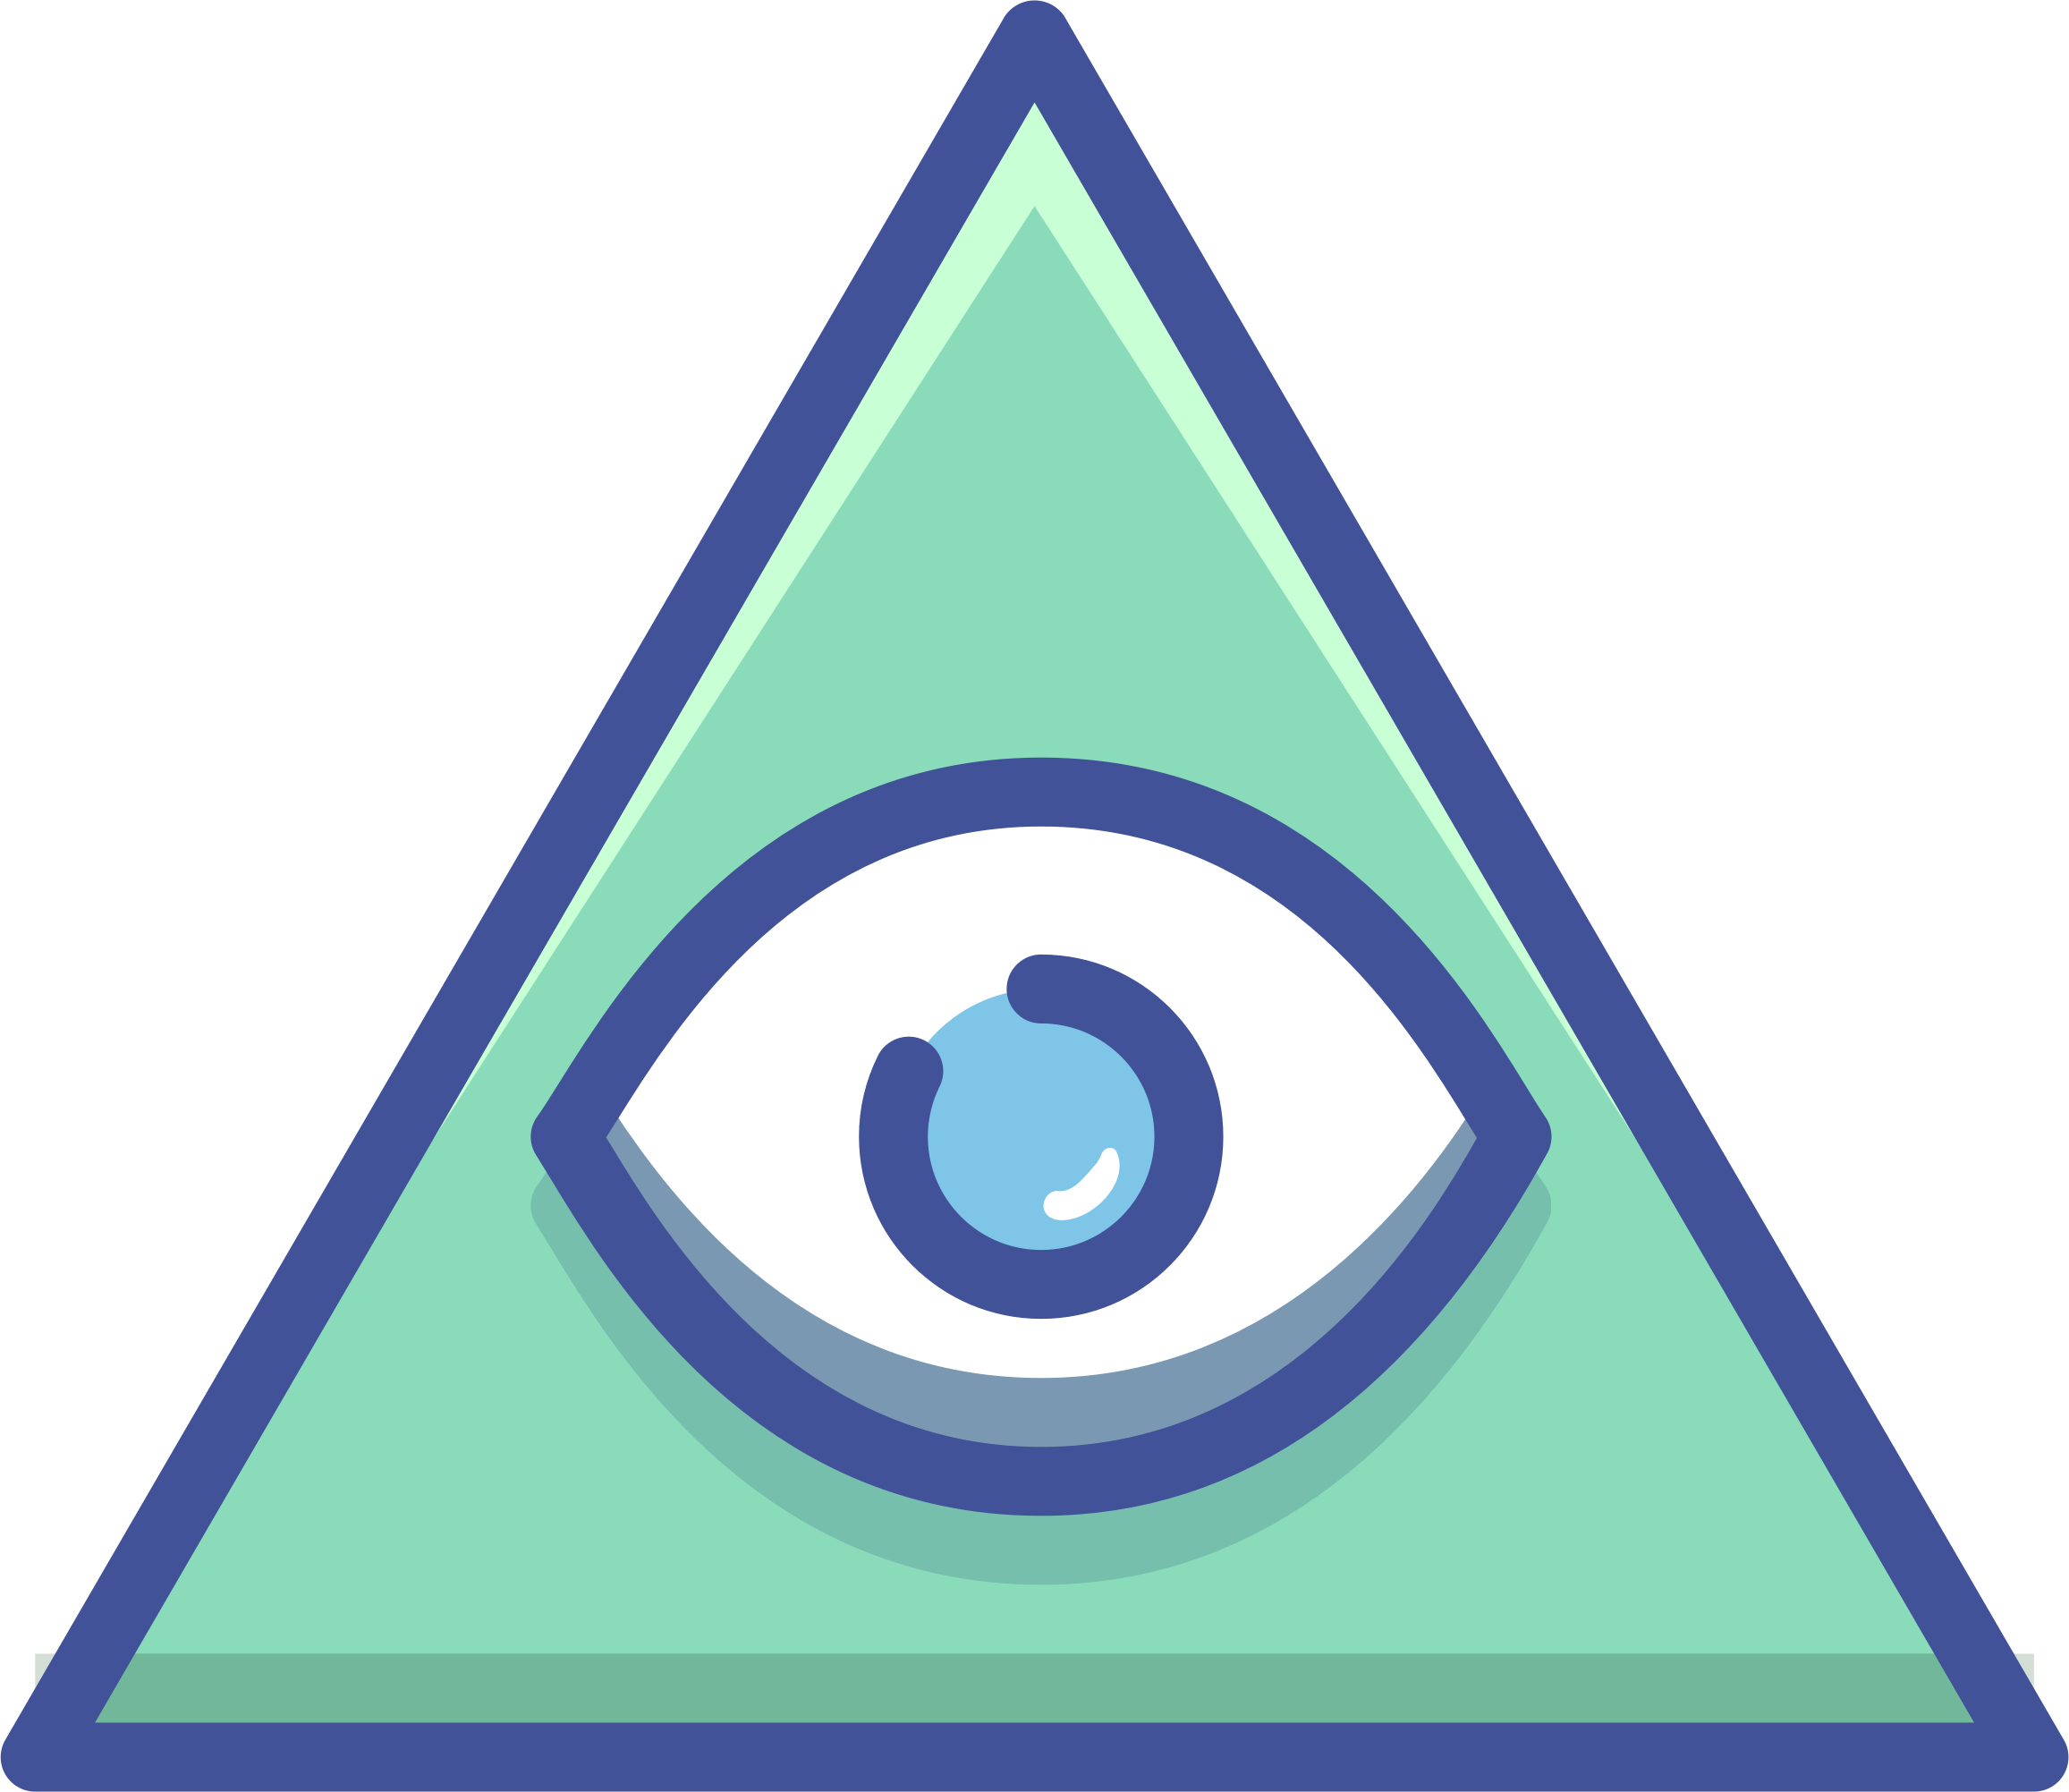 All Seeing Eye Pyramid Png